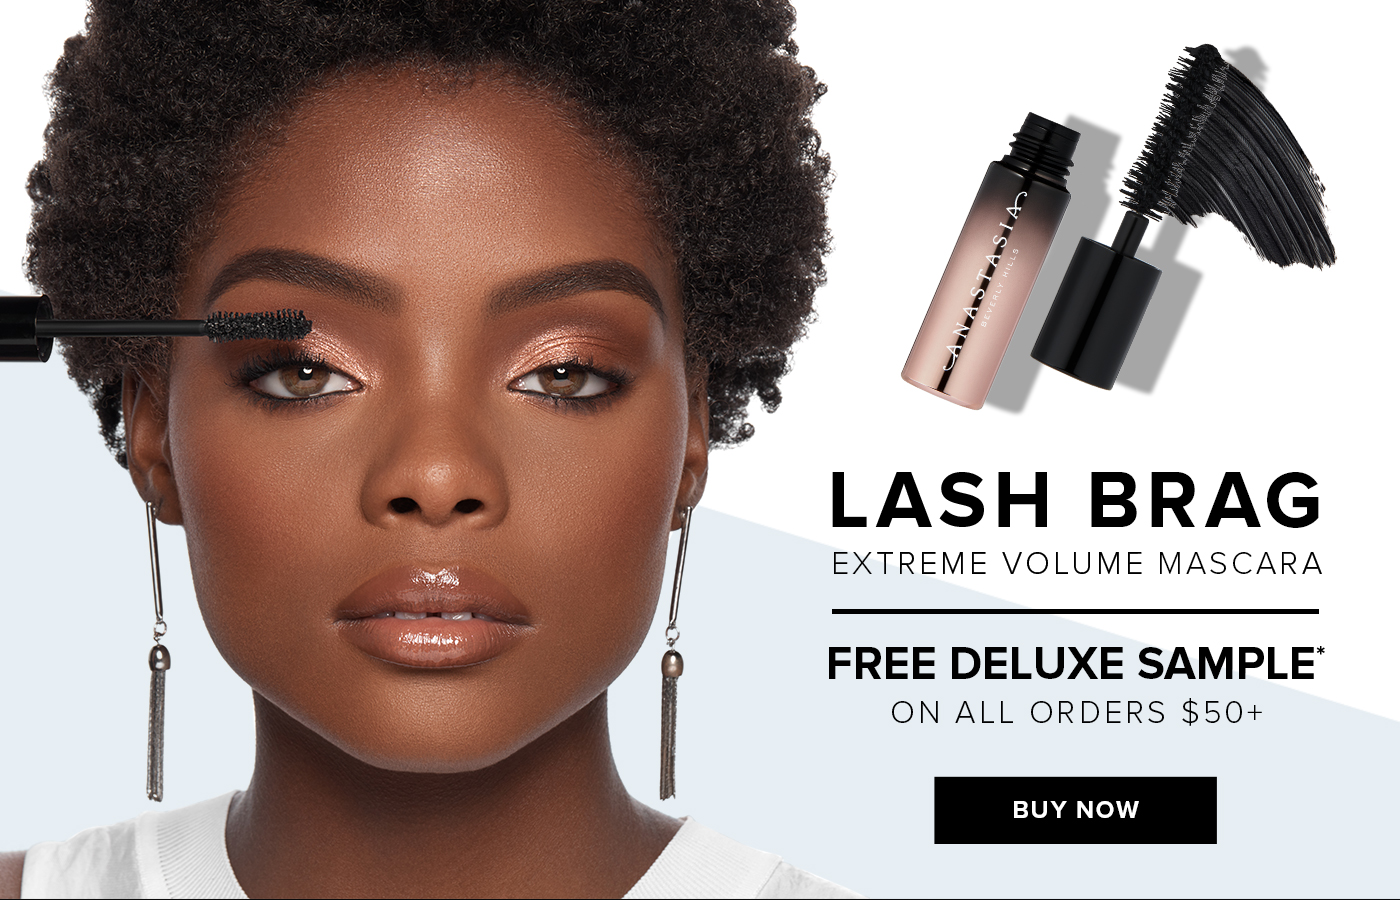 LASH BRAG EXTREME VOLUME MASCARA. FREE DELUXE SAMPLE* ON ALL ORDERS $50+ BUY NOW